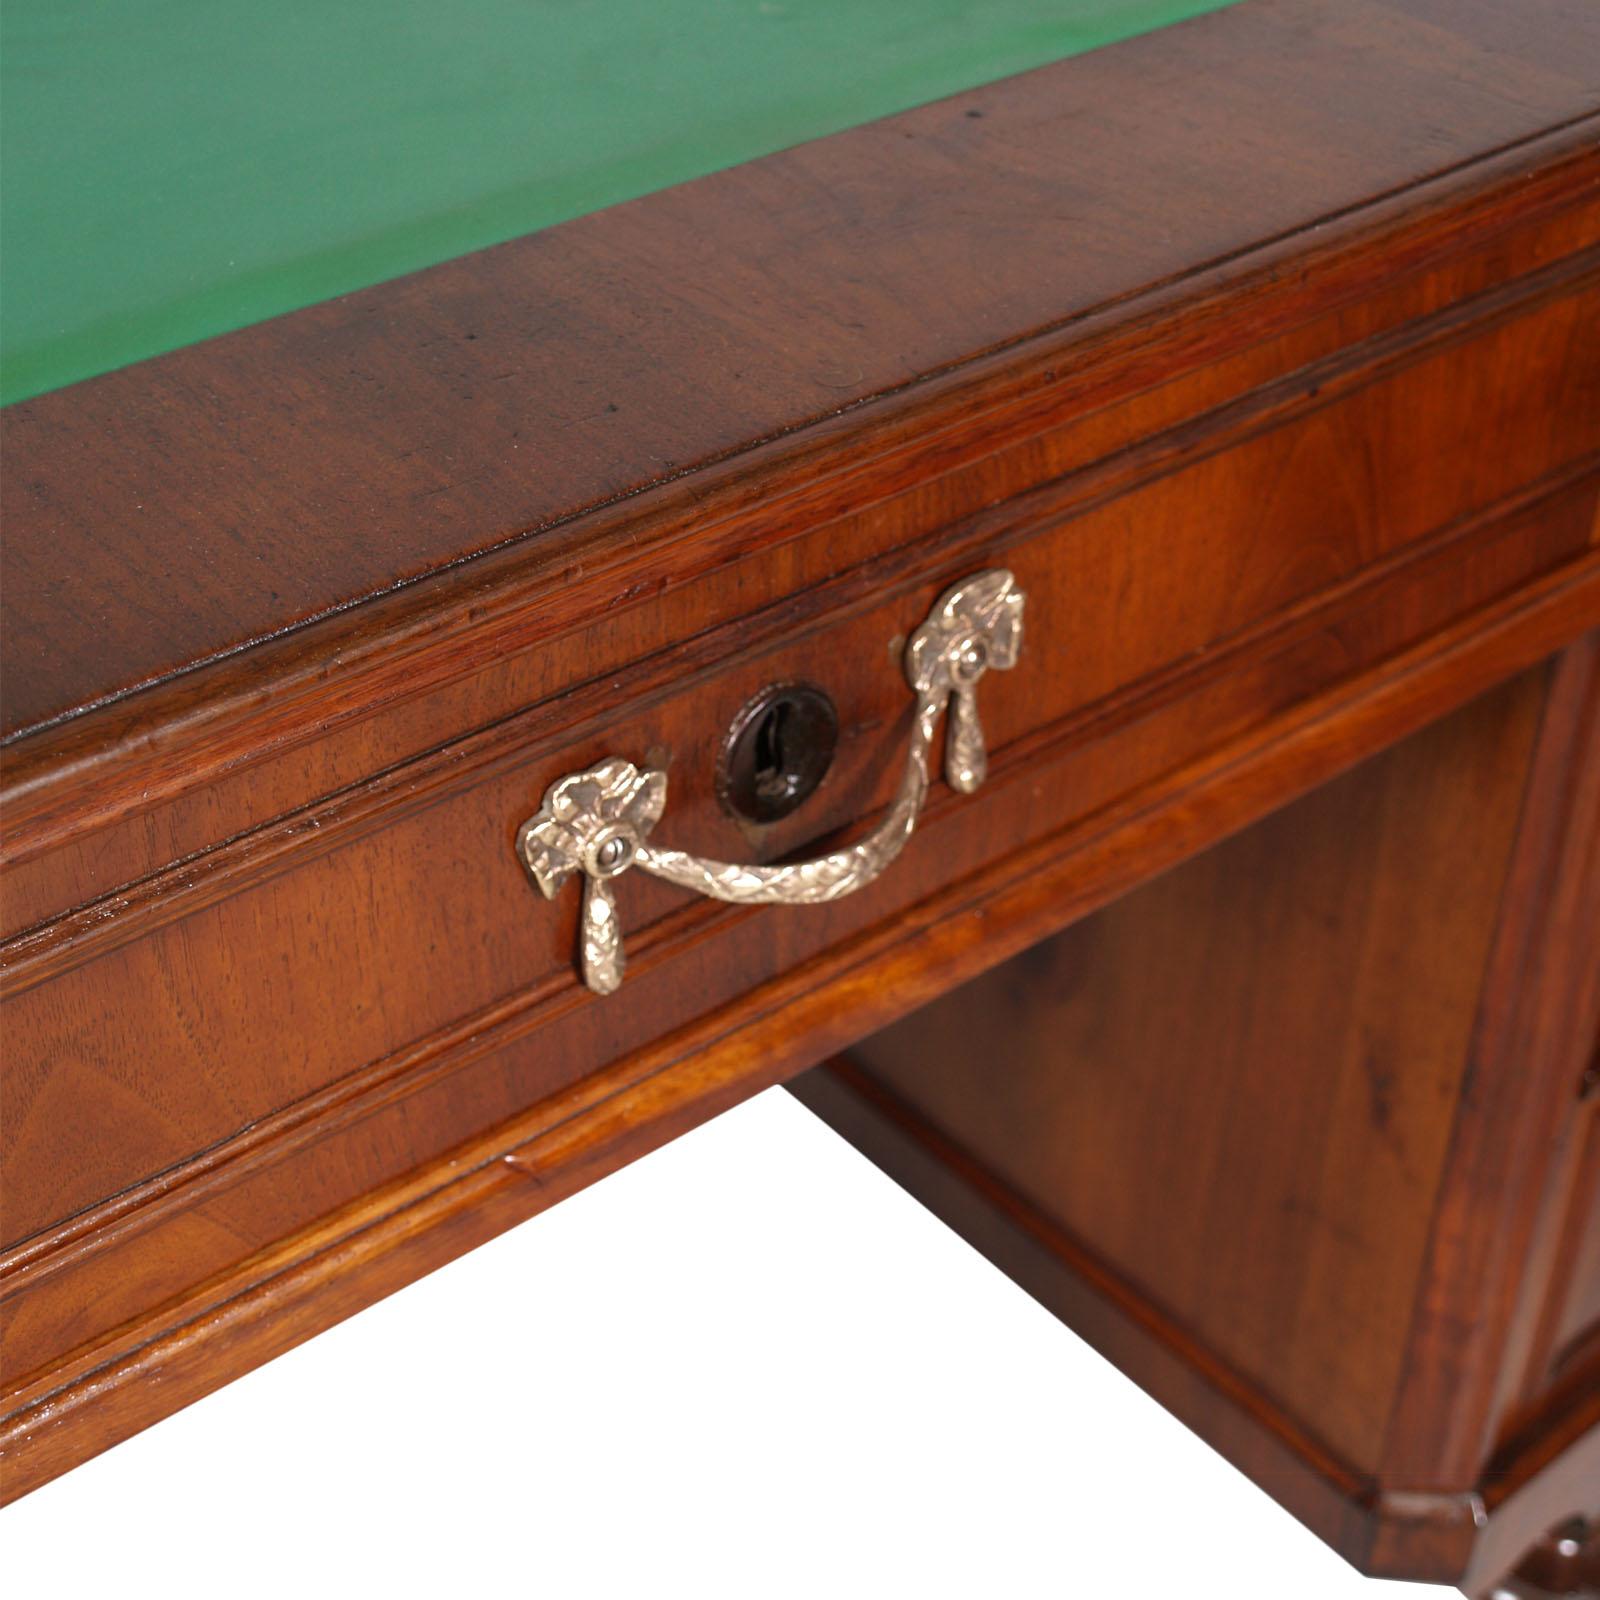 Mid-19th century Italian writing desk in solid blond walnut and weneer walnut, restored and finished with shellac and wax; new top in real leather.
Bottom of the drawers and back of the desk in solid fir.

Measures cm: H 93, W 126, D 63.